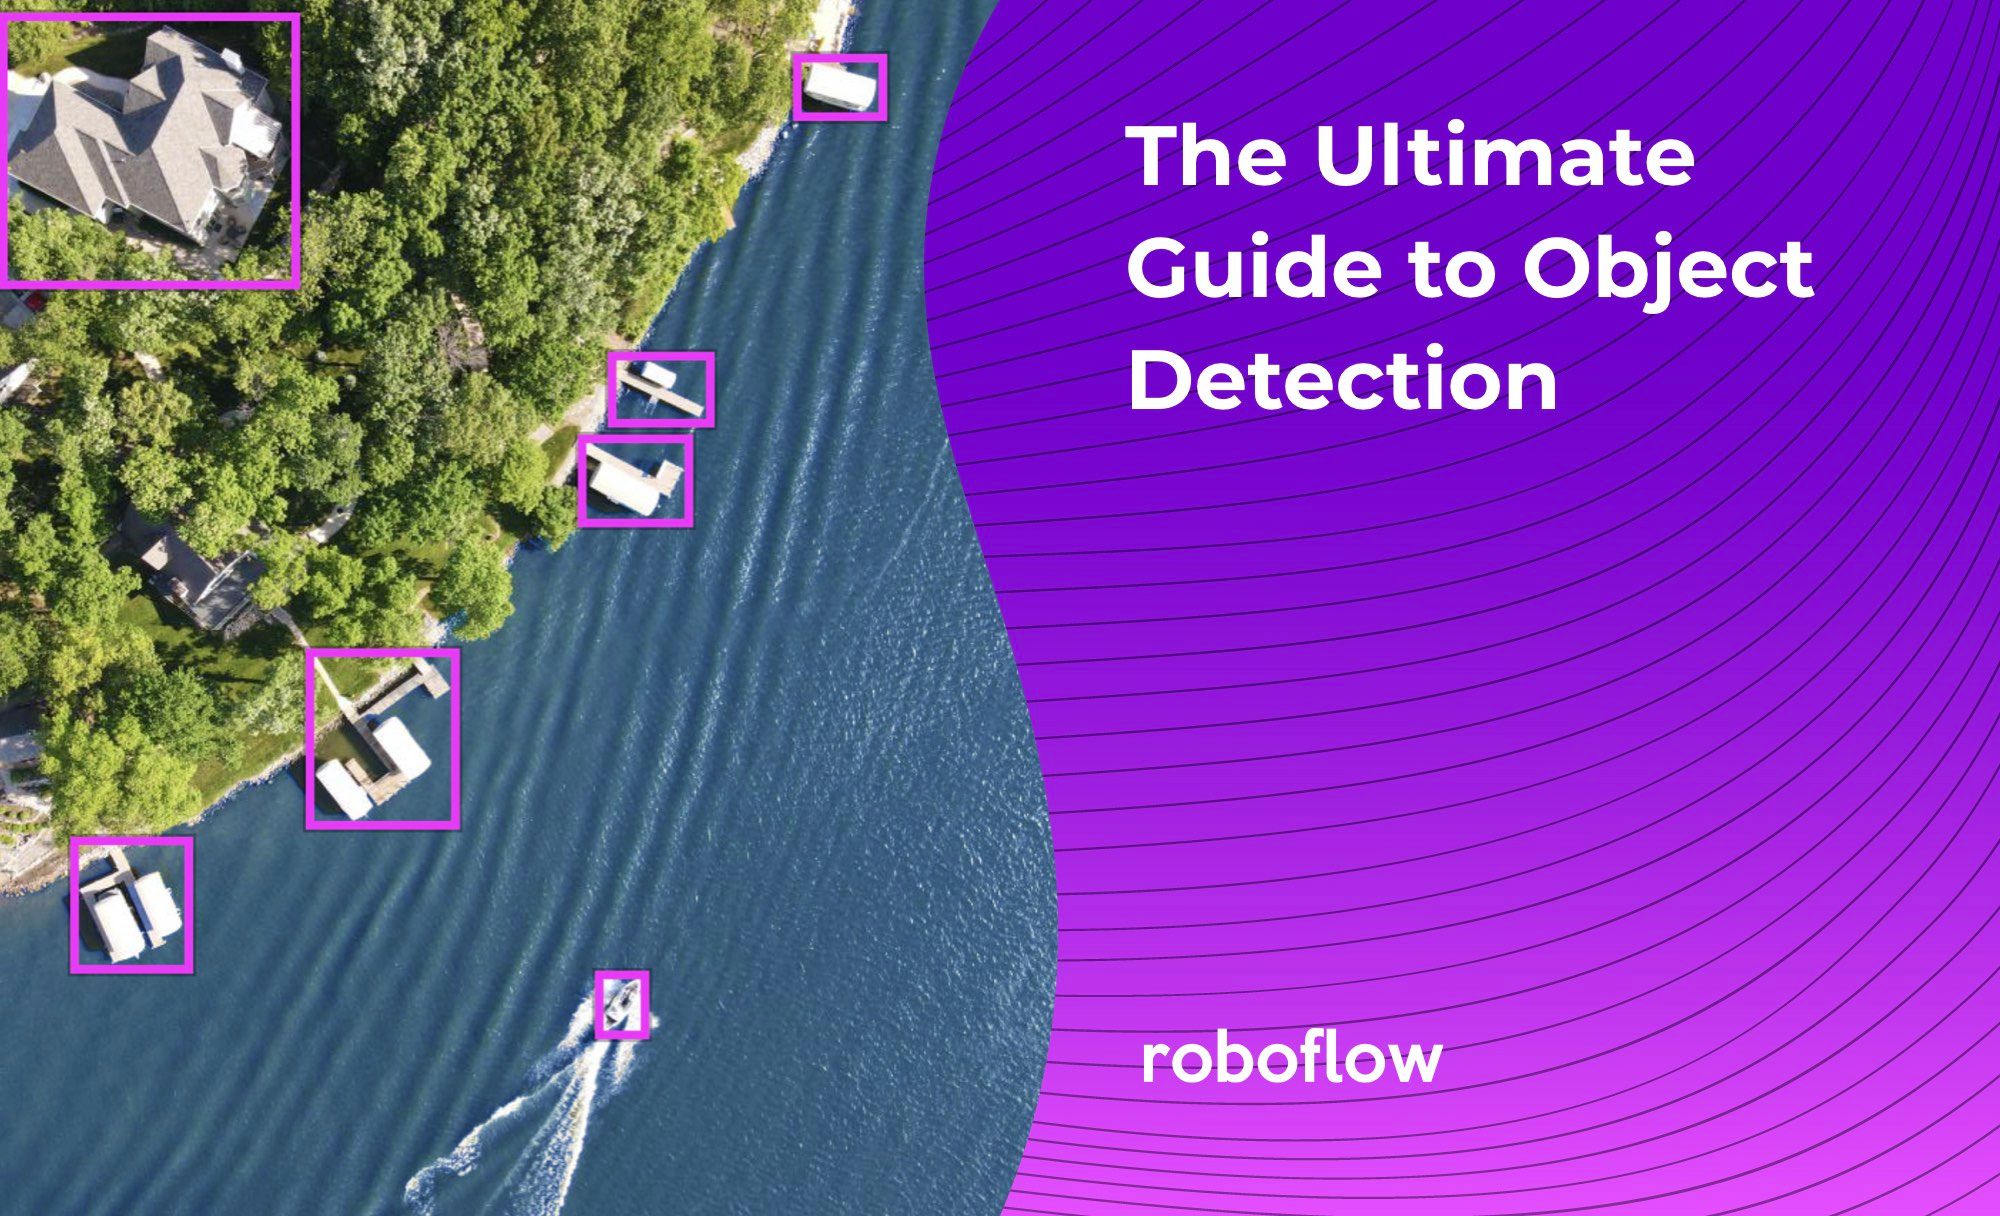 The Ultimate Guide to Object Detection